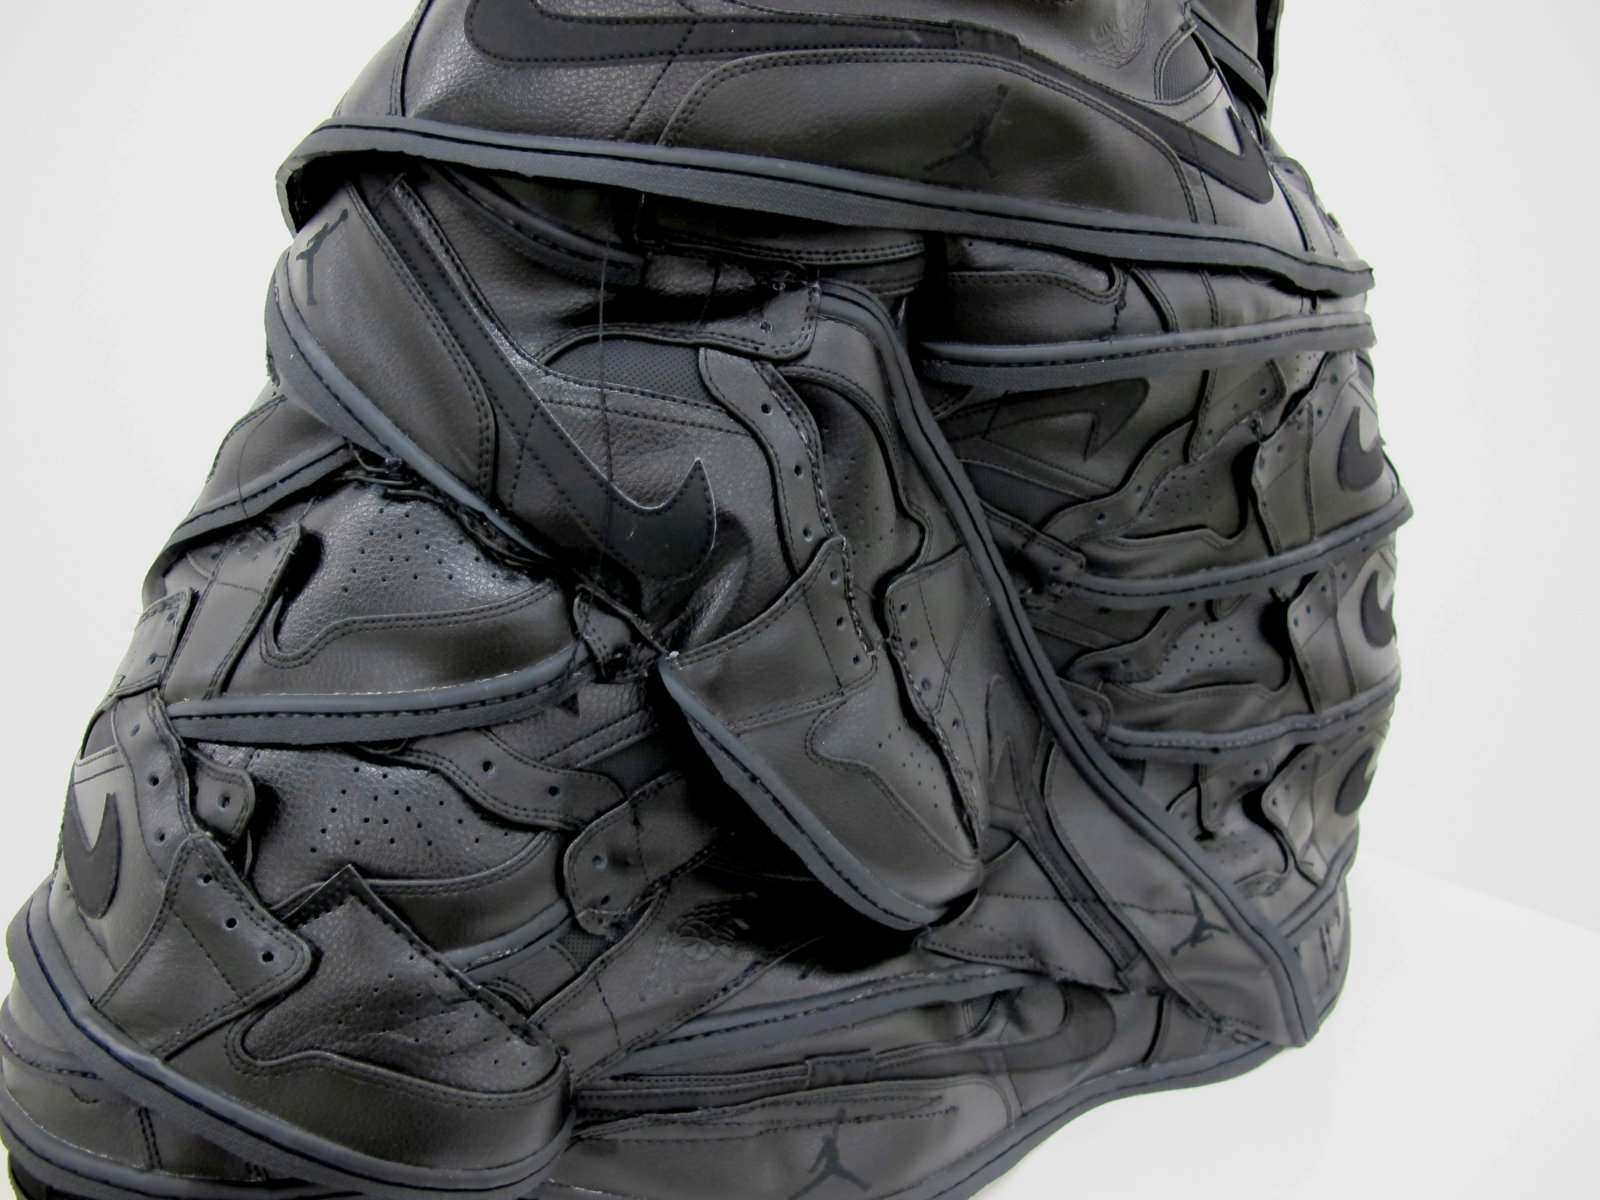 Brian Jungen, I Shall Be Released (detail), 2015, nike air jordan shoes (black, #1), 29 x 26 x 12 in. (74 x 66 x 31 cm)